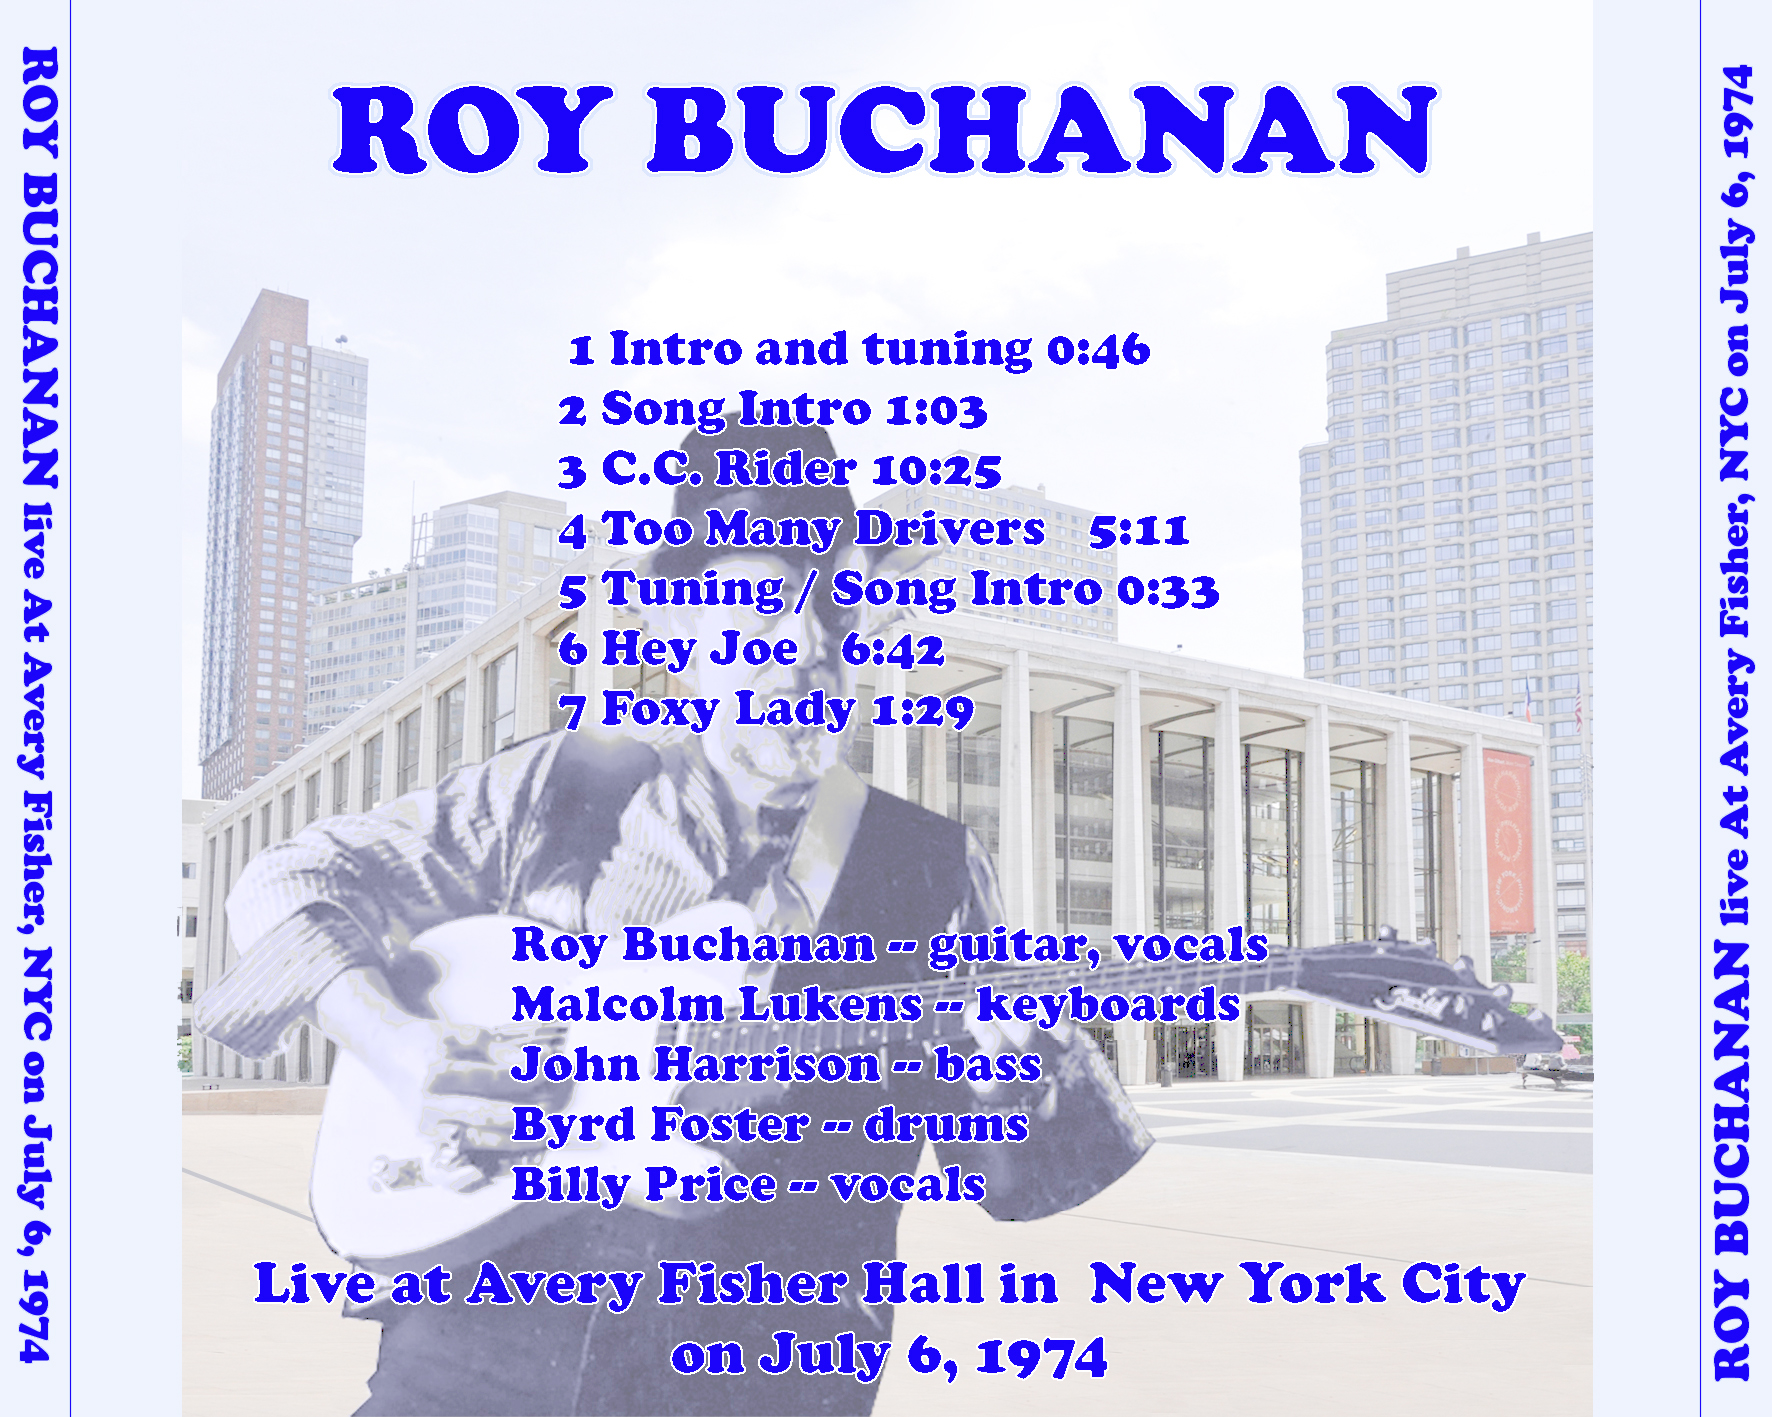 roy buchanan cdr live at avery fisher july 6, 1974 tray